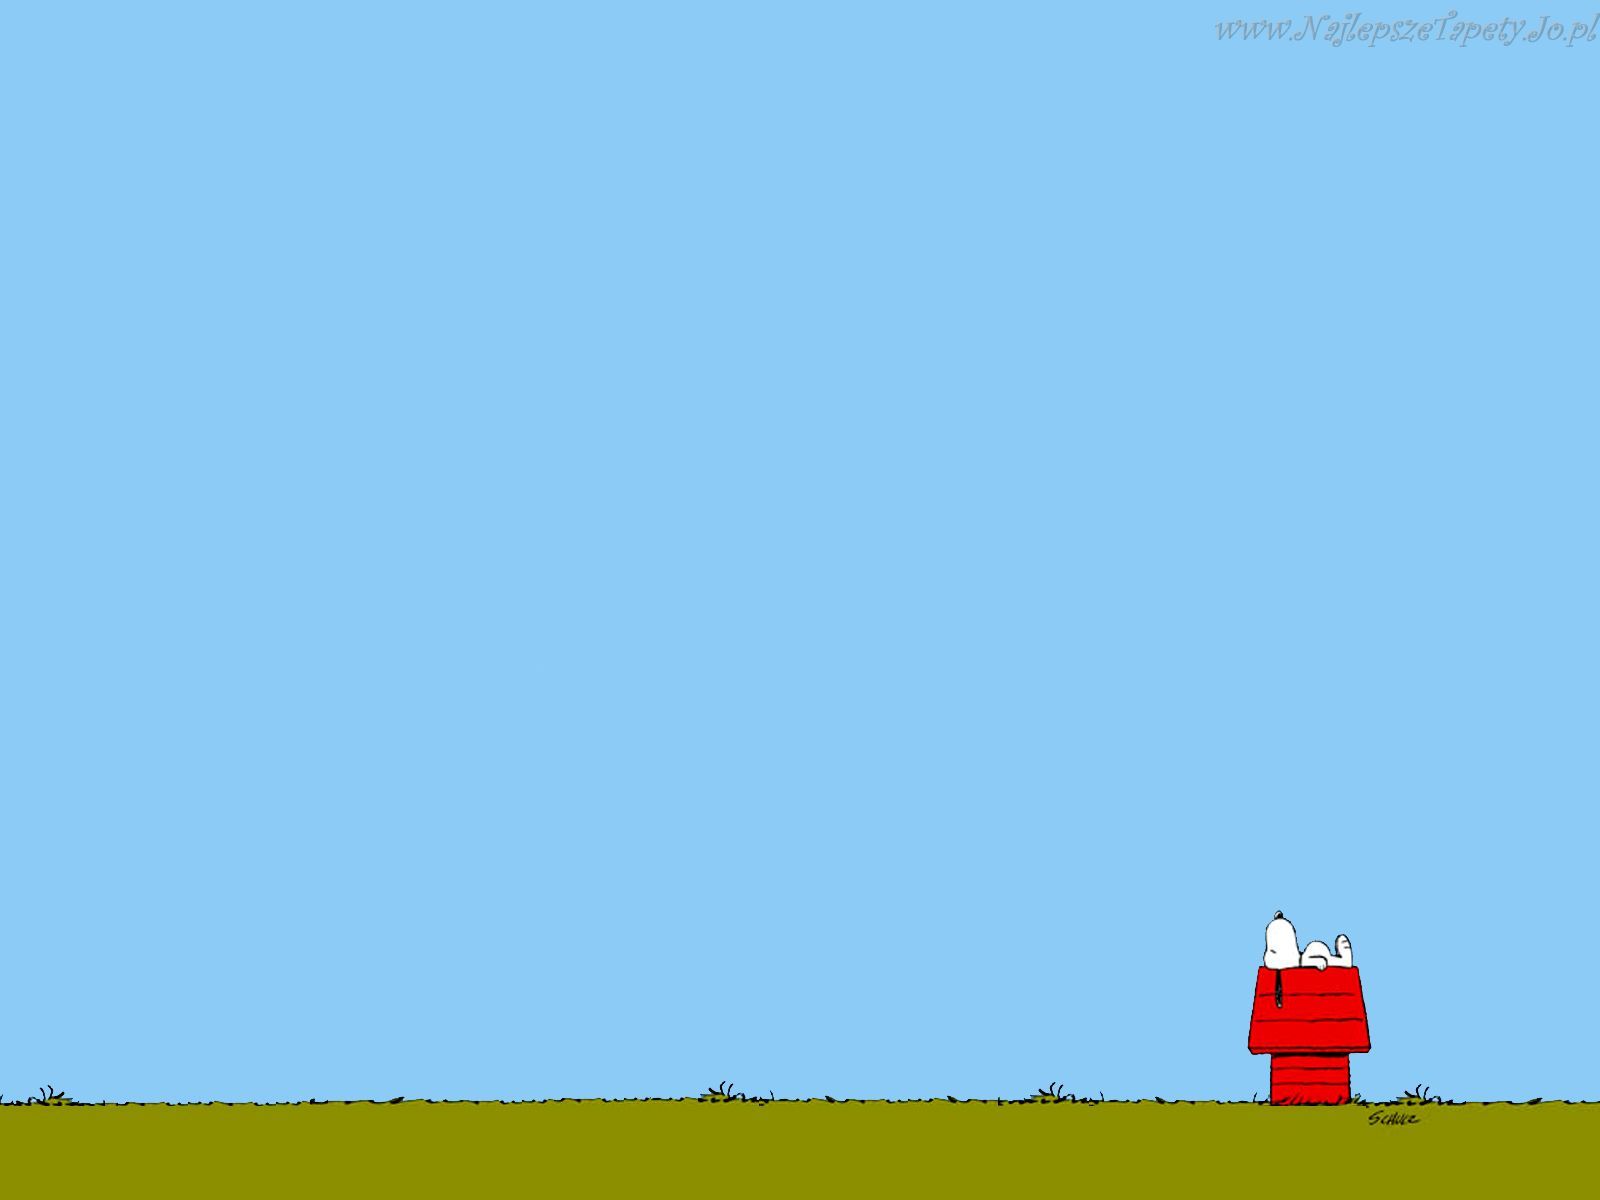 peanuts wallpapers | WallpaperUP